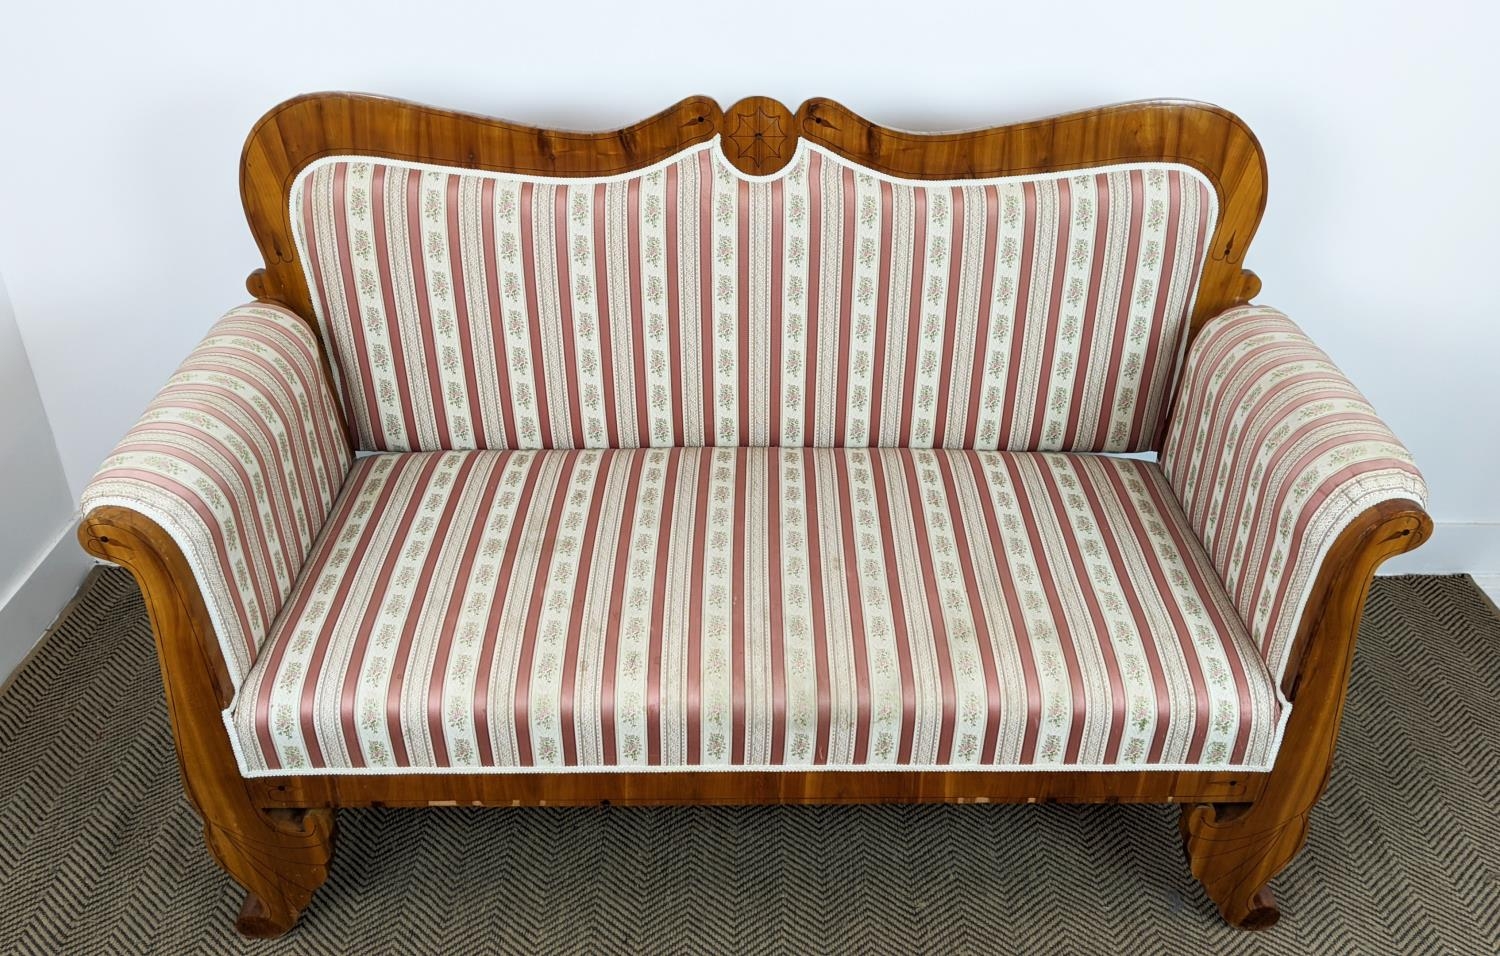 SOFA, Biedermeier cherrywood and line inlaid with pink striped upholstery, 104cm H x 168cm x 68cm. - Image 6 of 24